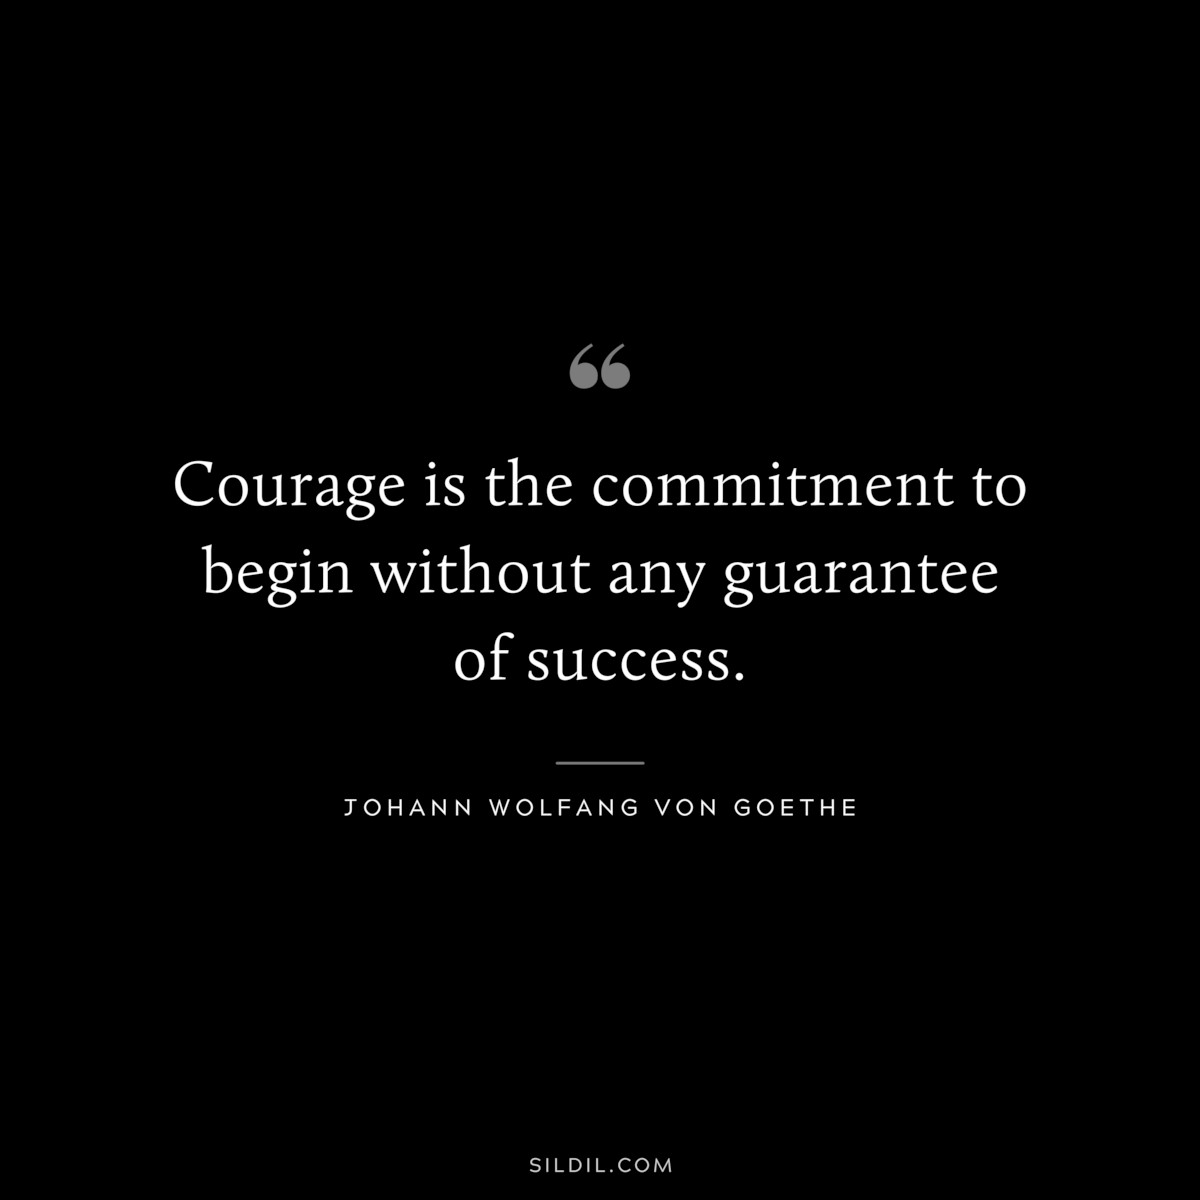 Courage is the commitment to begin without any guarantee of success. ― Johann Wolfang von Goethe